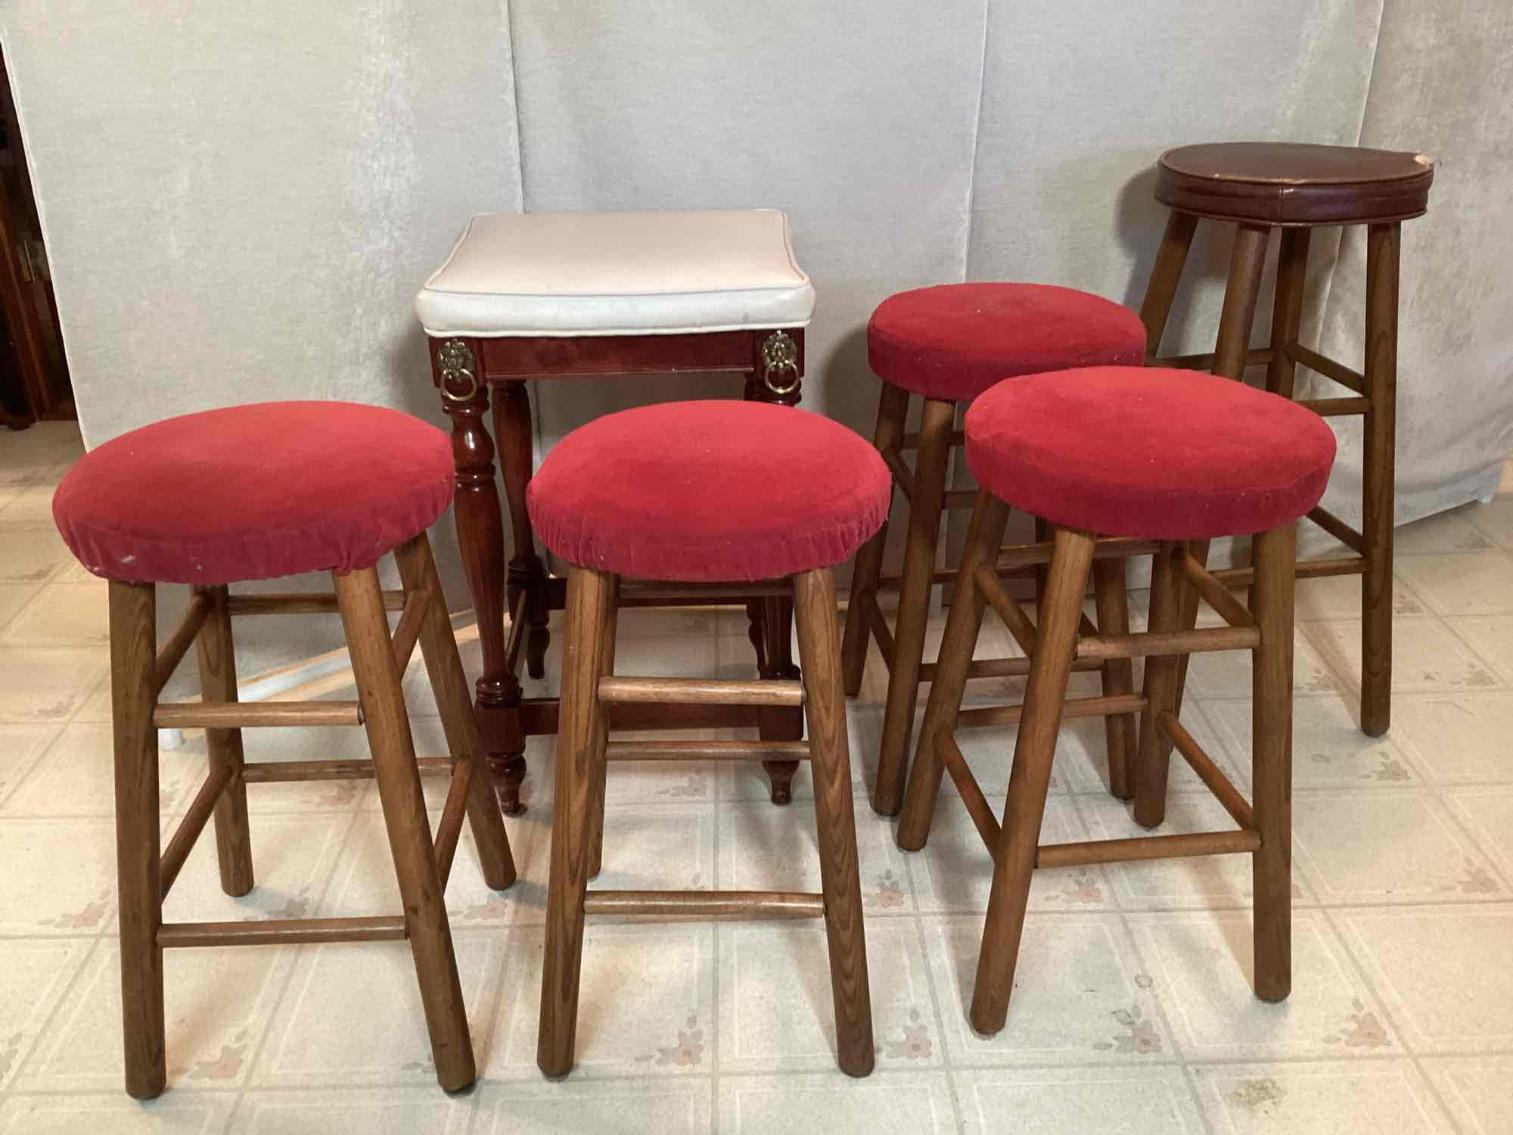 Image for Stools